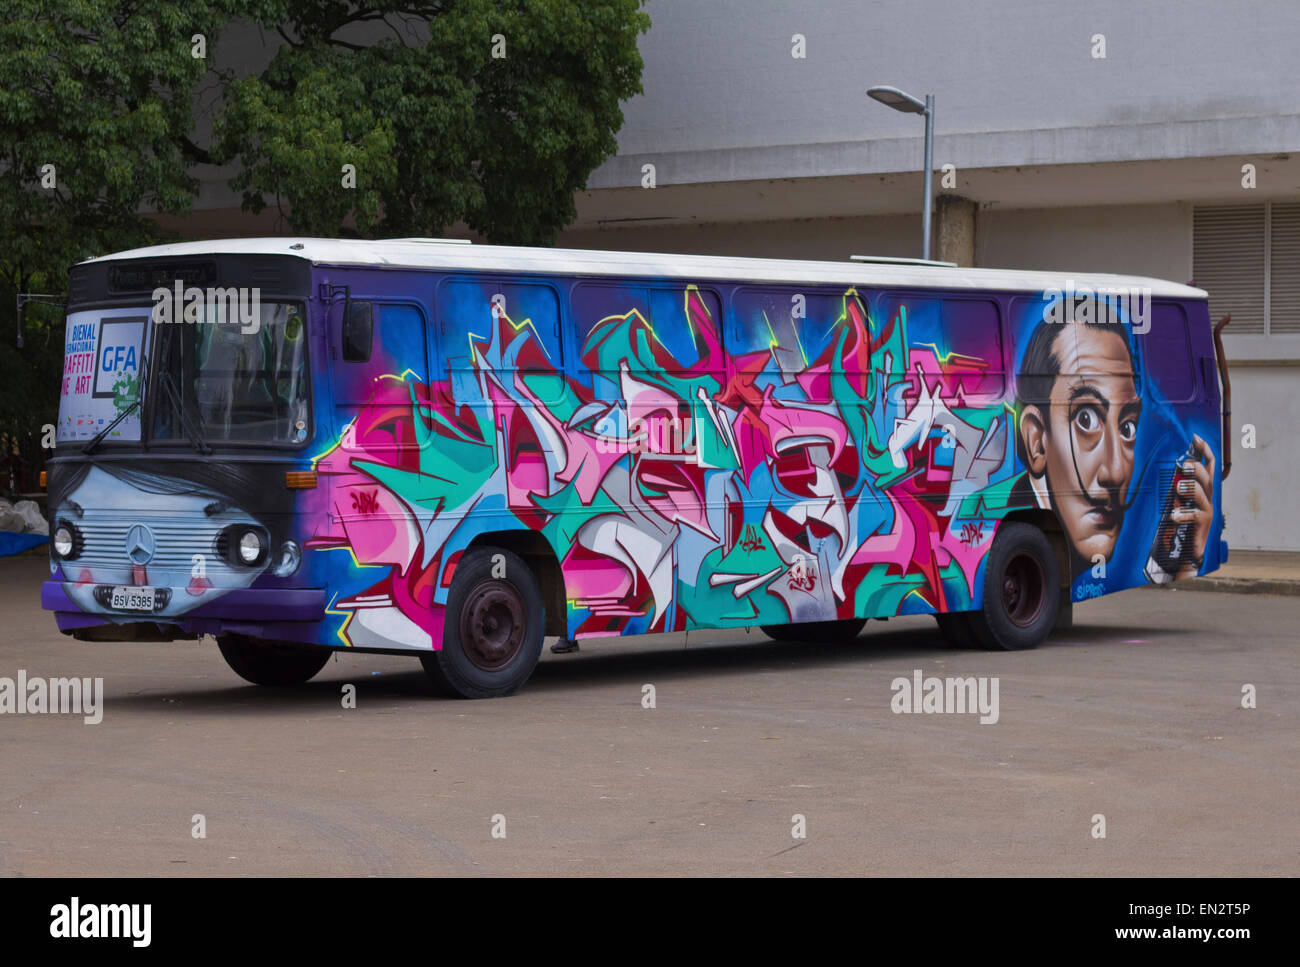 SAO PAULO, BRAZIL - FEBRUARY 01, 2015: A bus painted with grafiti art design exposed in the Ibirapuera Park at Sao Paulo Brazil. Stock Photo